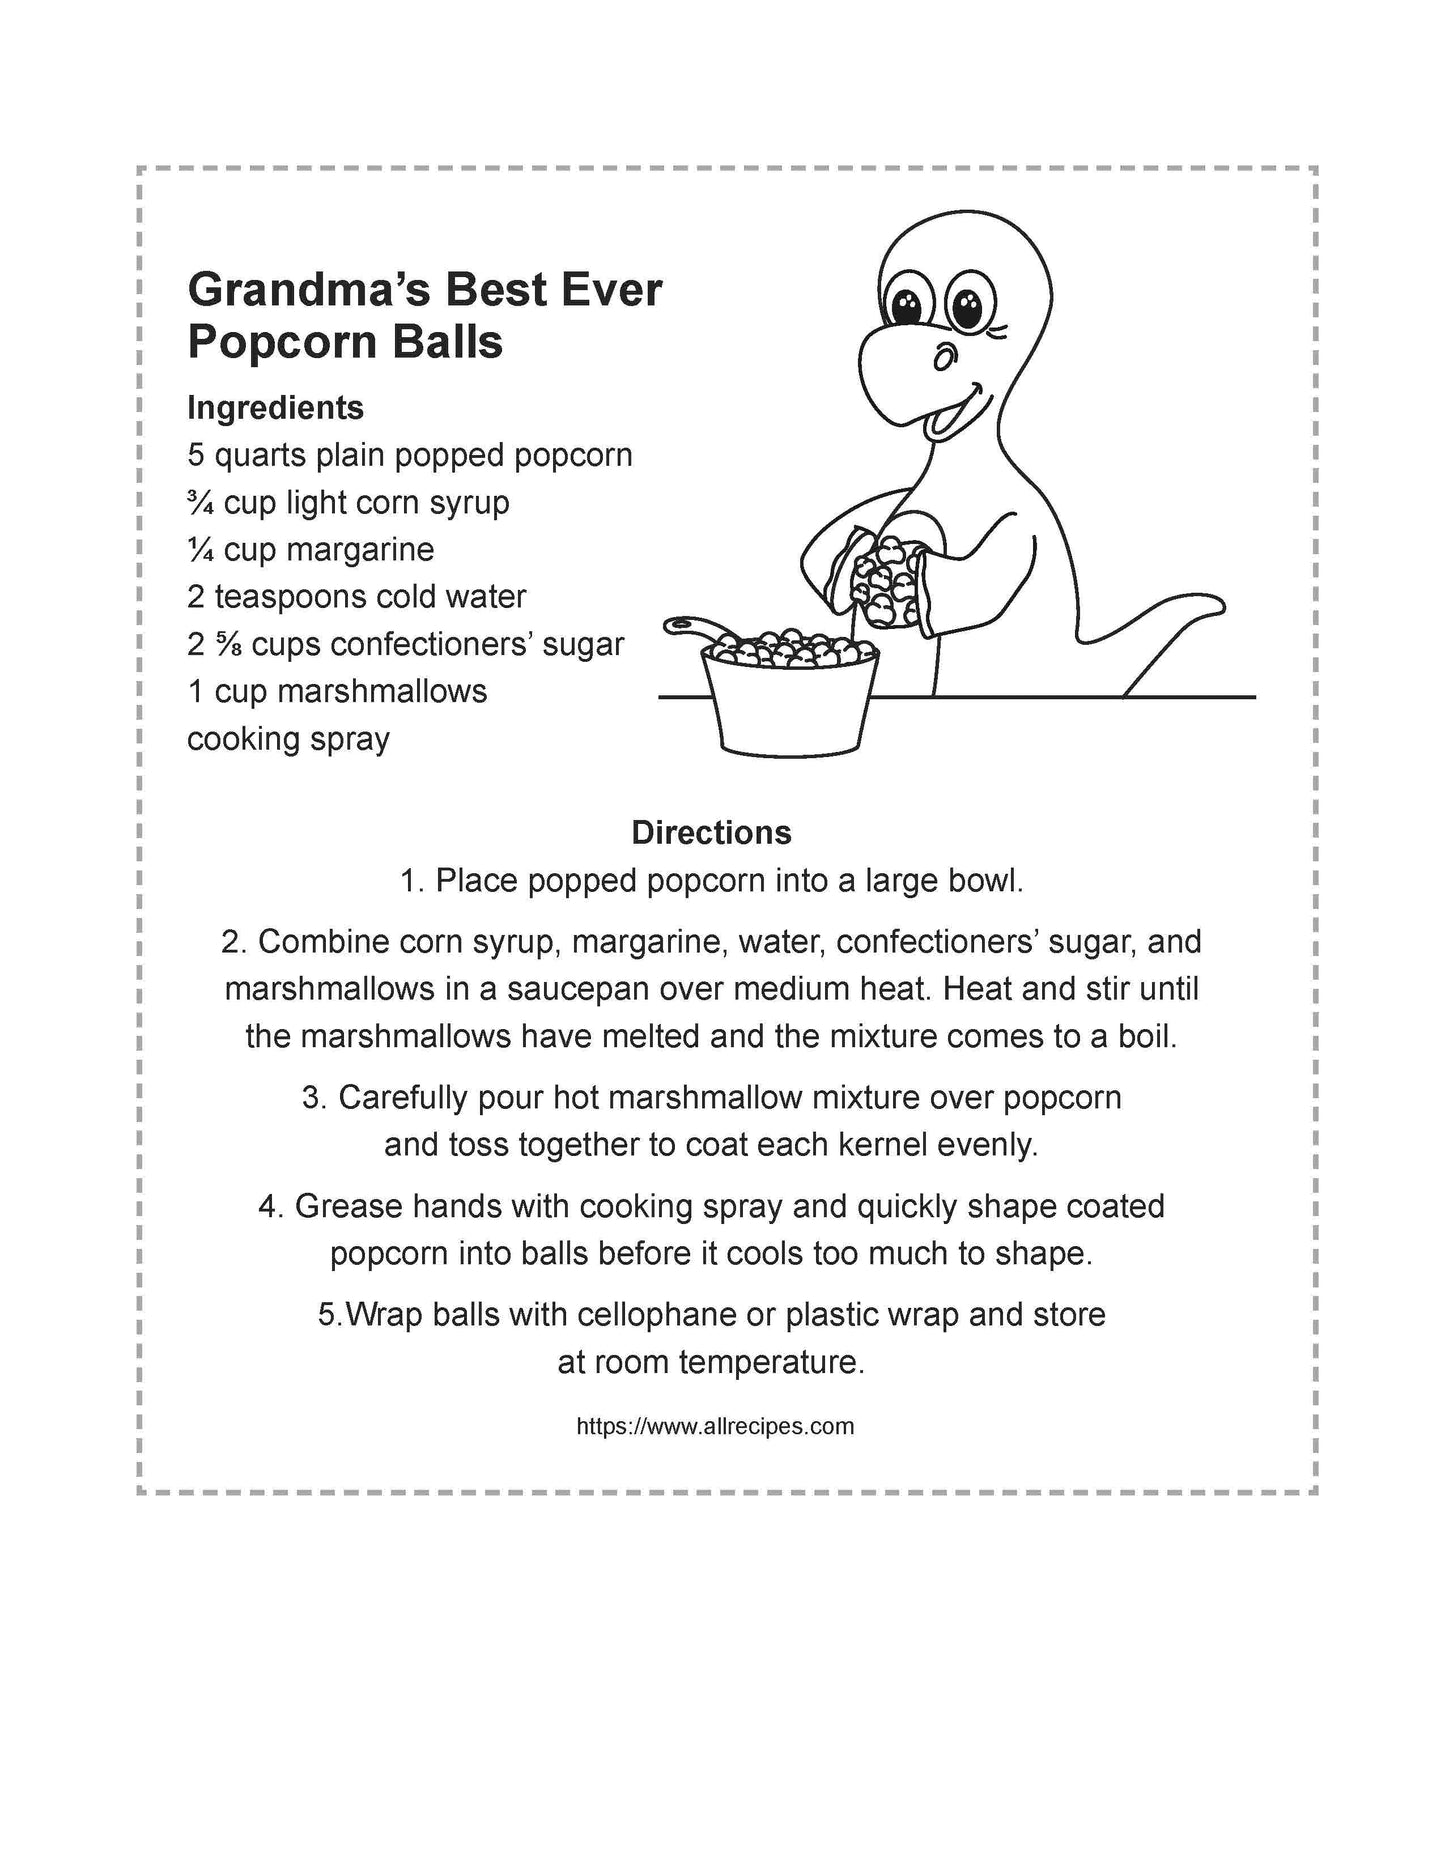 "Coloring page with a recipe titled 'Grandma’s Best Ever Popcorn Balls,' including a list of ingredients such as plain popped popcorn, light corn syrup, and marshmallows. The recipe provides step-by-step directions on making popcorn balls. At the top right, there is a cartoon dinosaur eating popcorn from a large bowl. The page has a dashed line border, indicating a section that can be cut out, and a link to the website allrecipes.com is provided at the bottom for additional recipes.